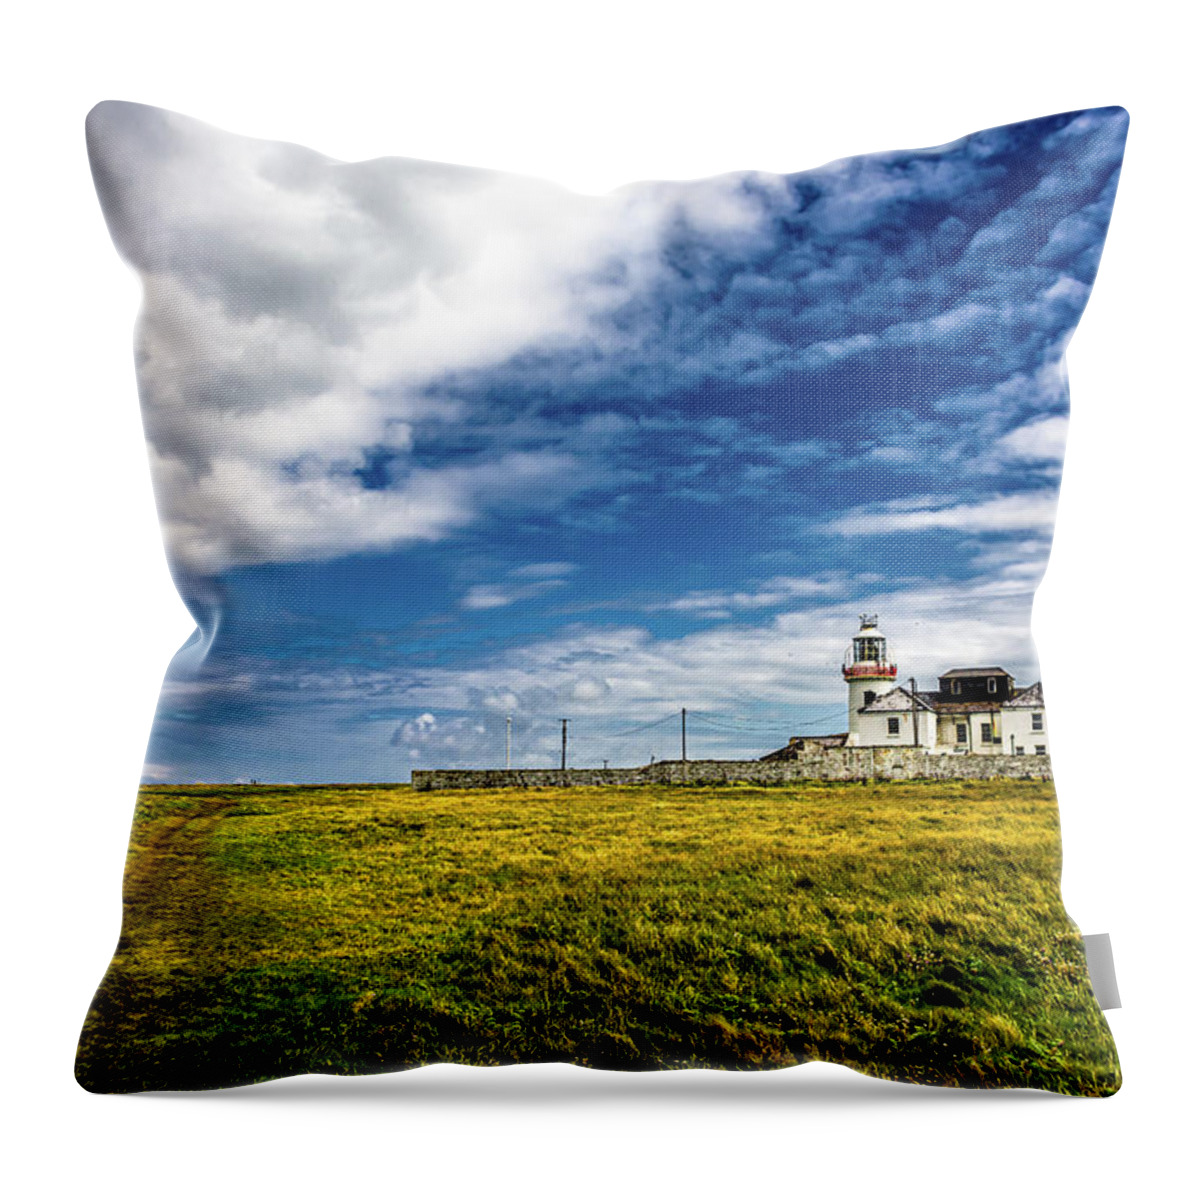 Ireland Throw Pillow featuring the photograph Lighthouse On Loop Head Peninsula In Ireland by Andreas Berthold